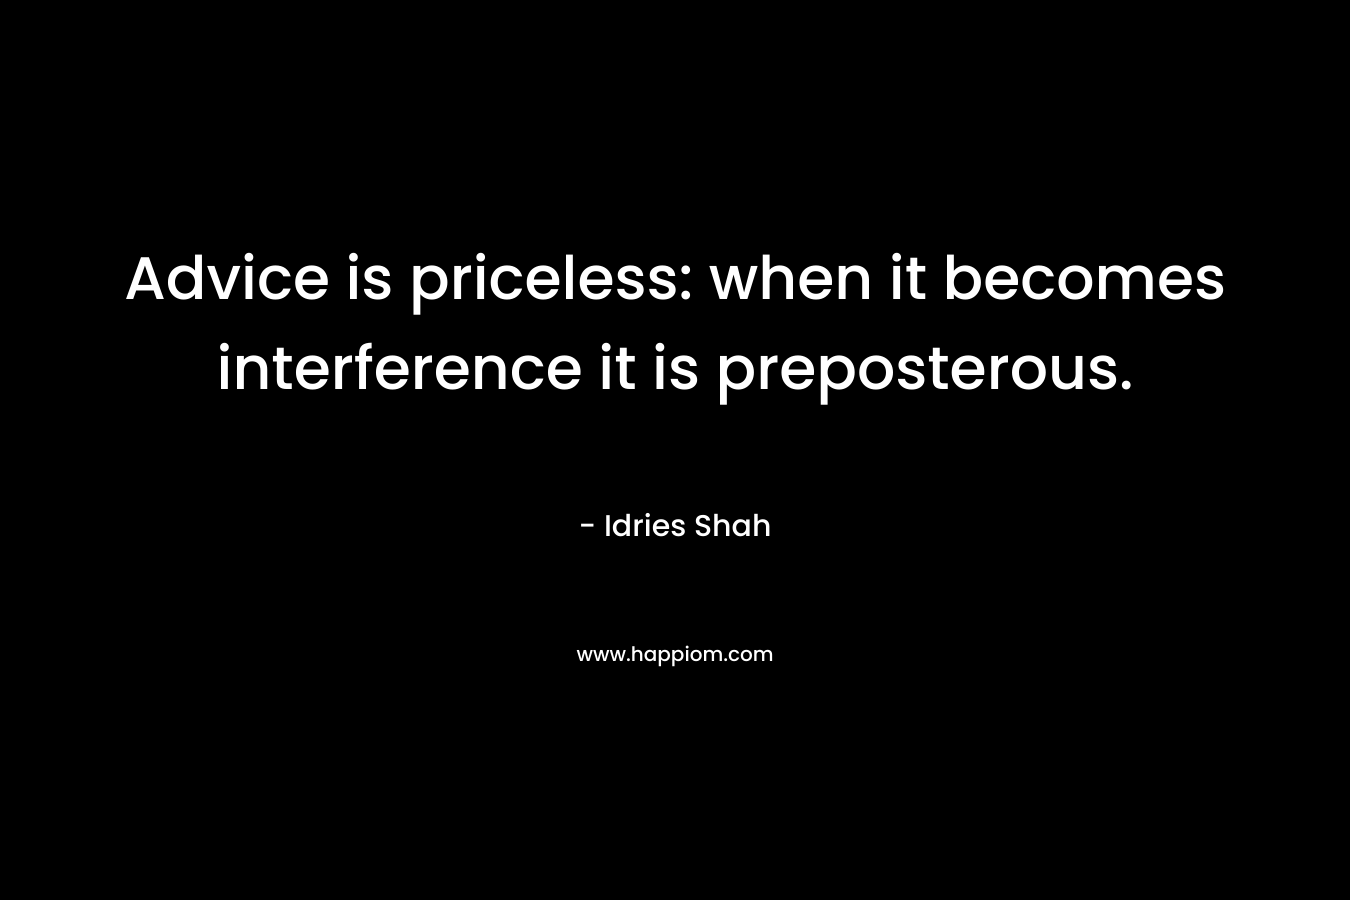 Advice is priceless: when it becomes interference it is preposterous. – Idries Shah